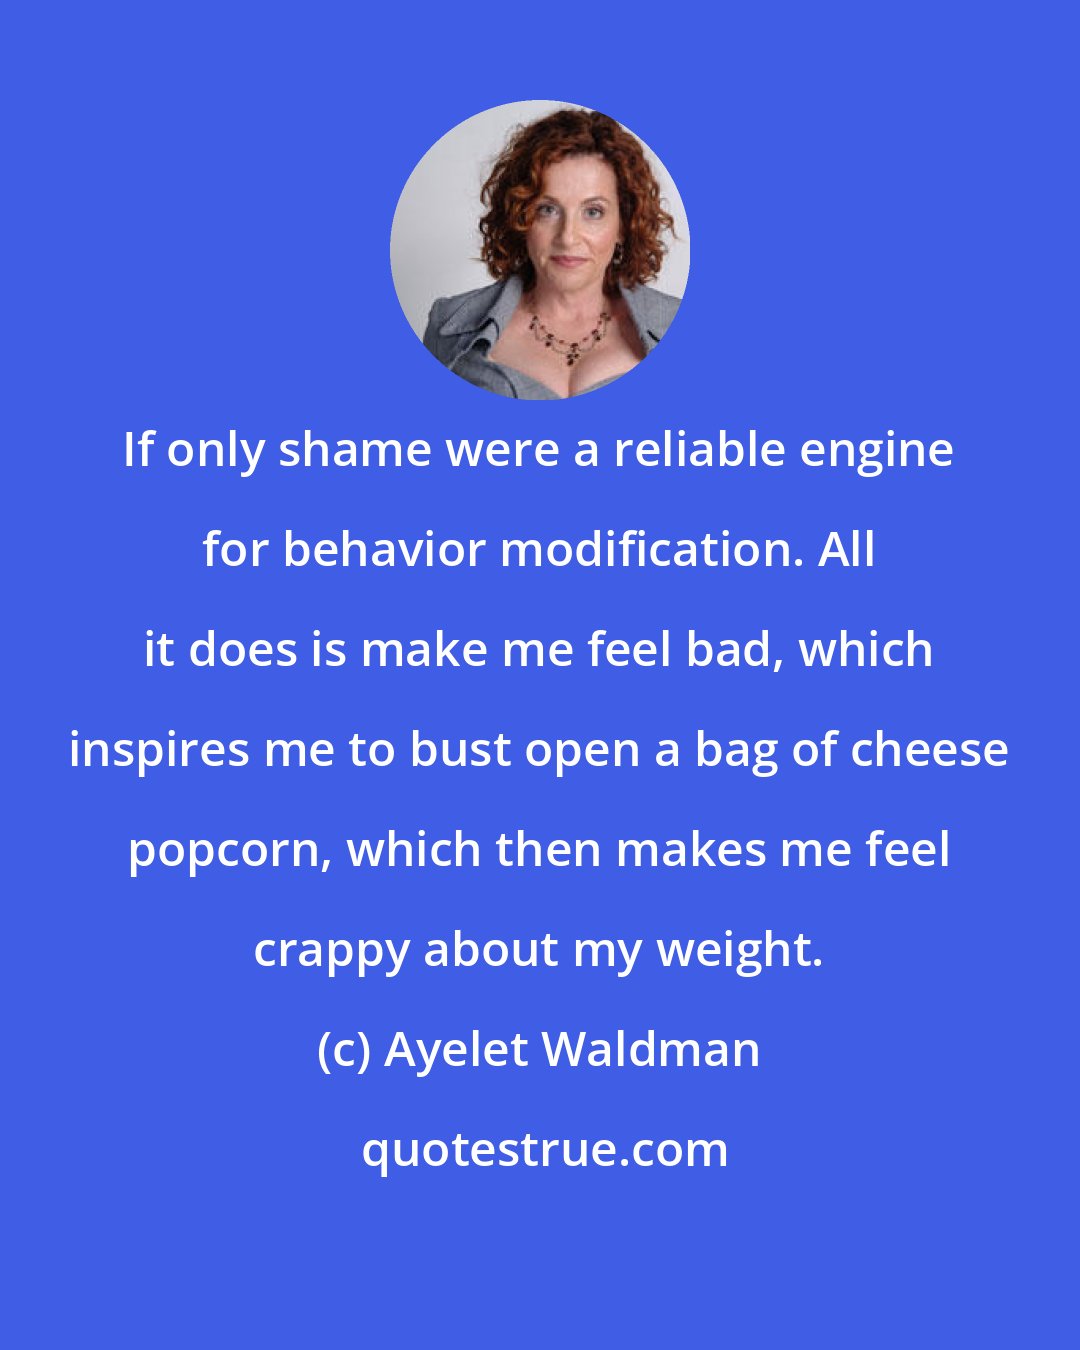 Ayelet Waldman: If only shame were a reliable engine for behavior modification. All it does is make me feel bad, which inspires me to bust open a bag of cheese popcorn, which then makes me feel crappy about my weight.